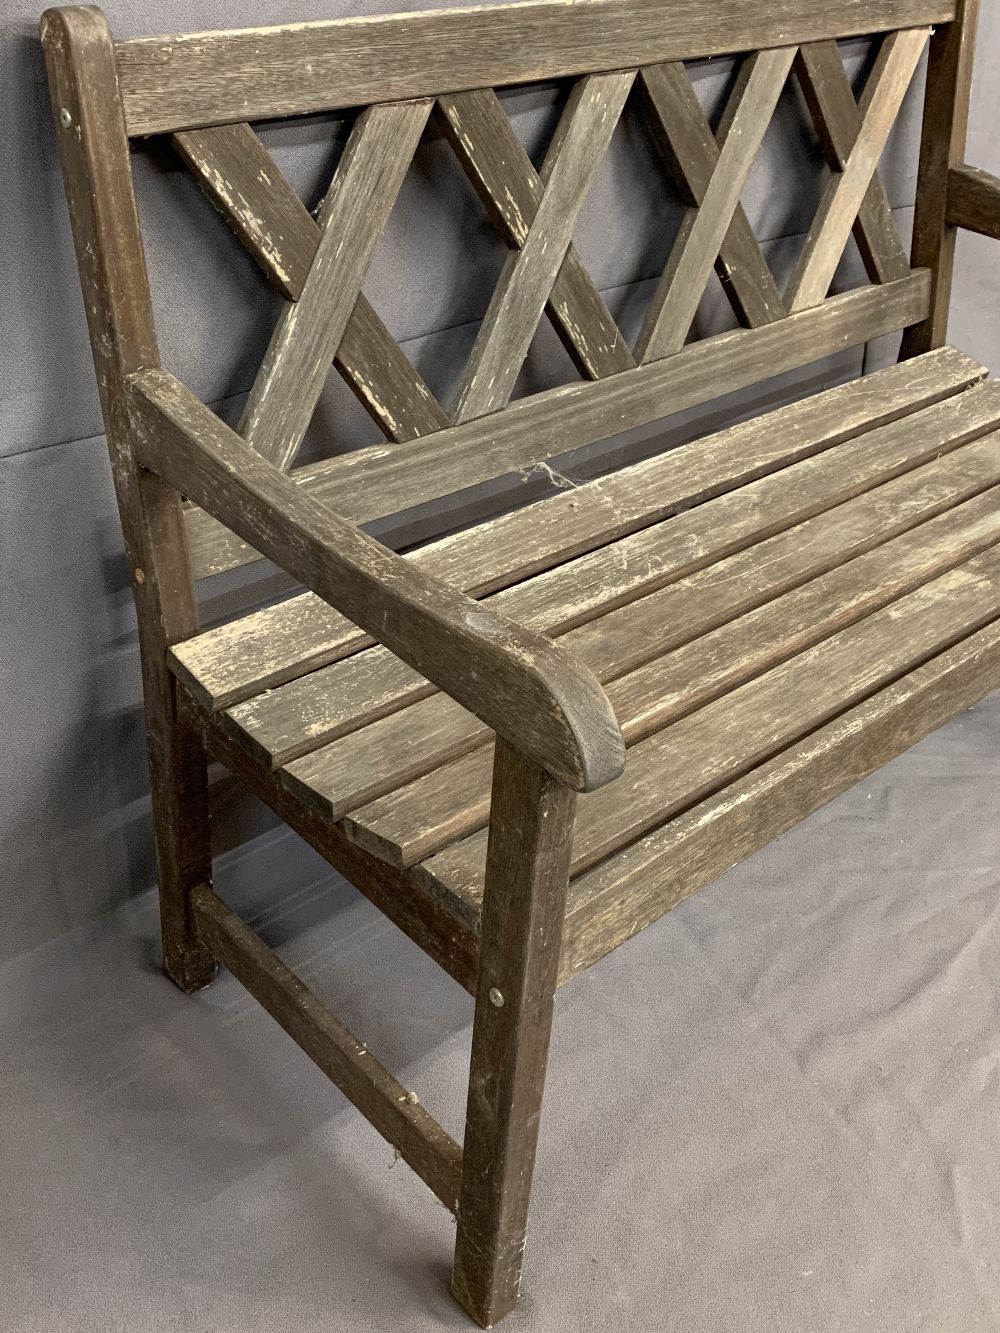 GARDEN BENCH - wooden with lattice effect back, 90cms H, 119cms W, 60cms D - Image 2 of 3